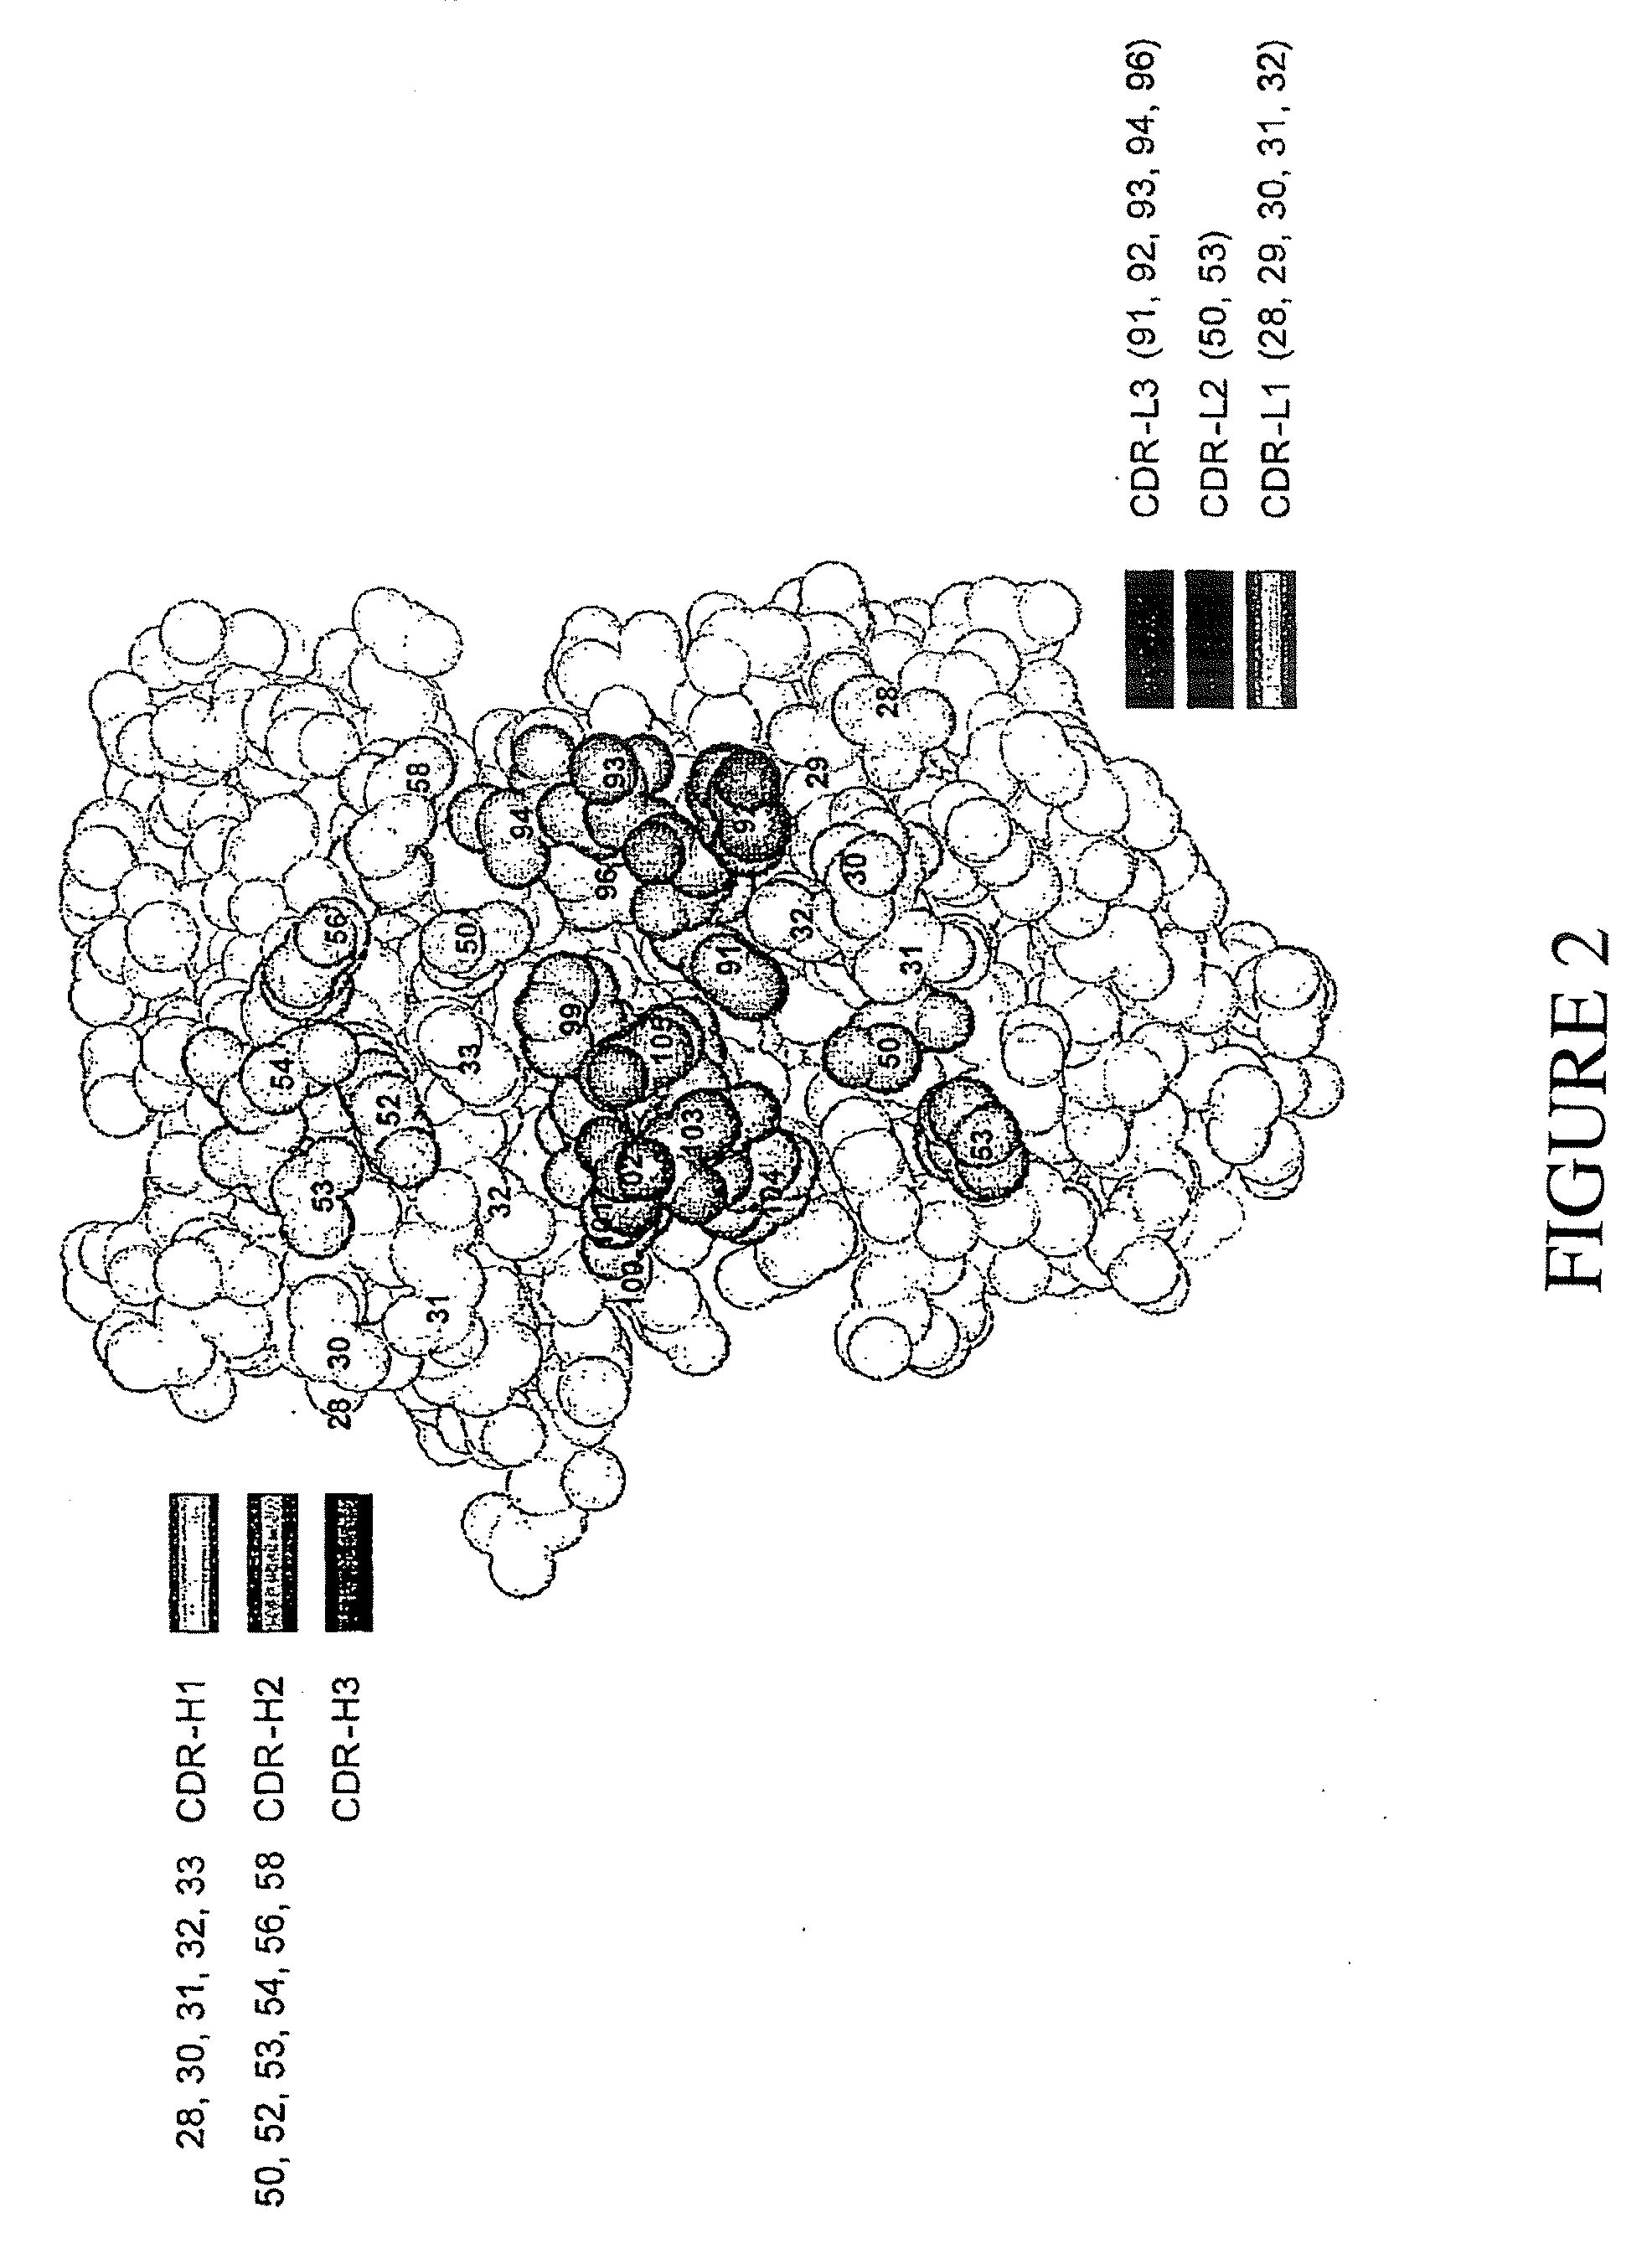 Binding Polypeptides and Uses Thereof